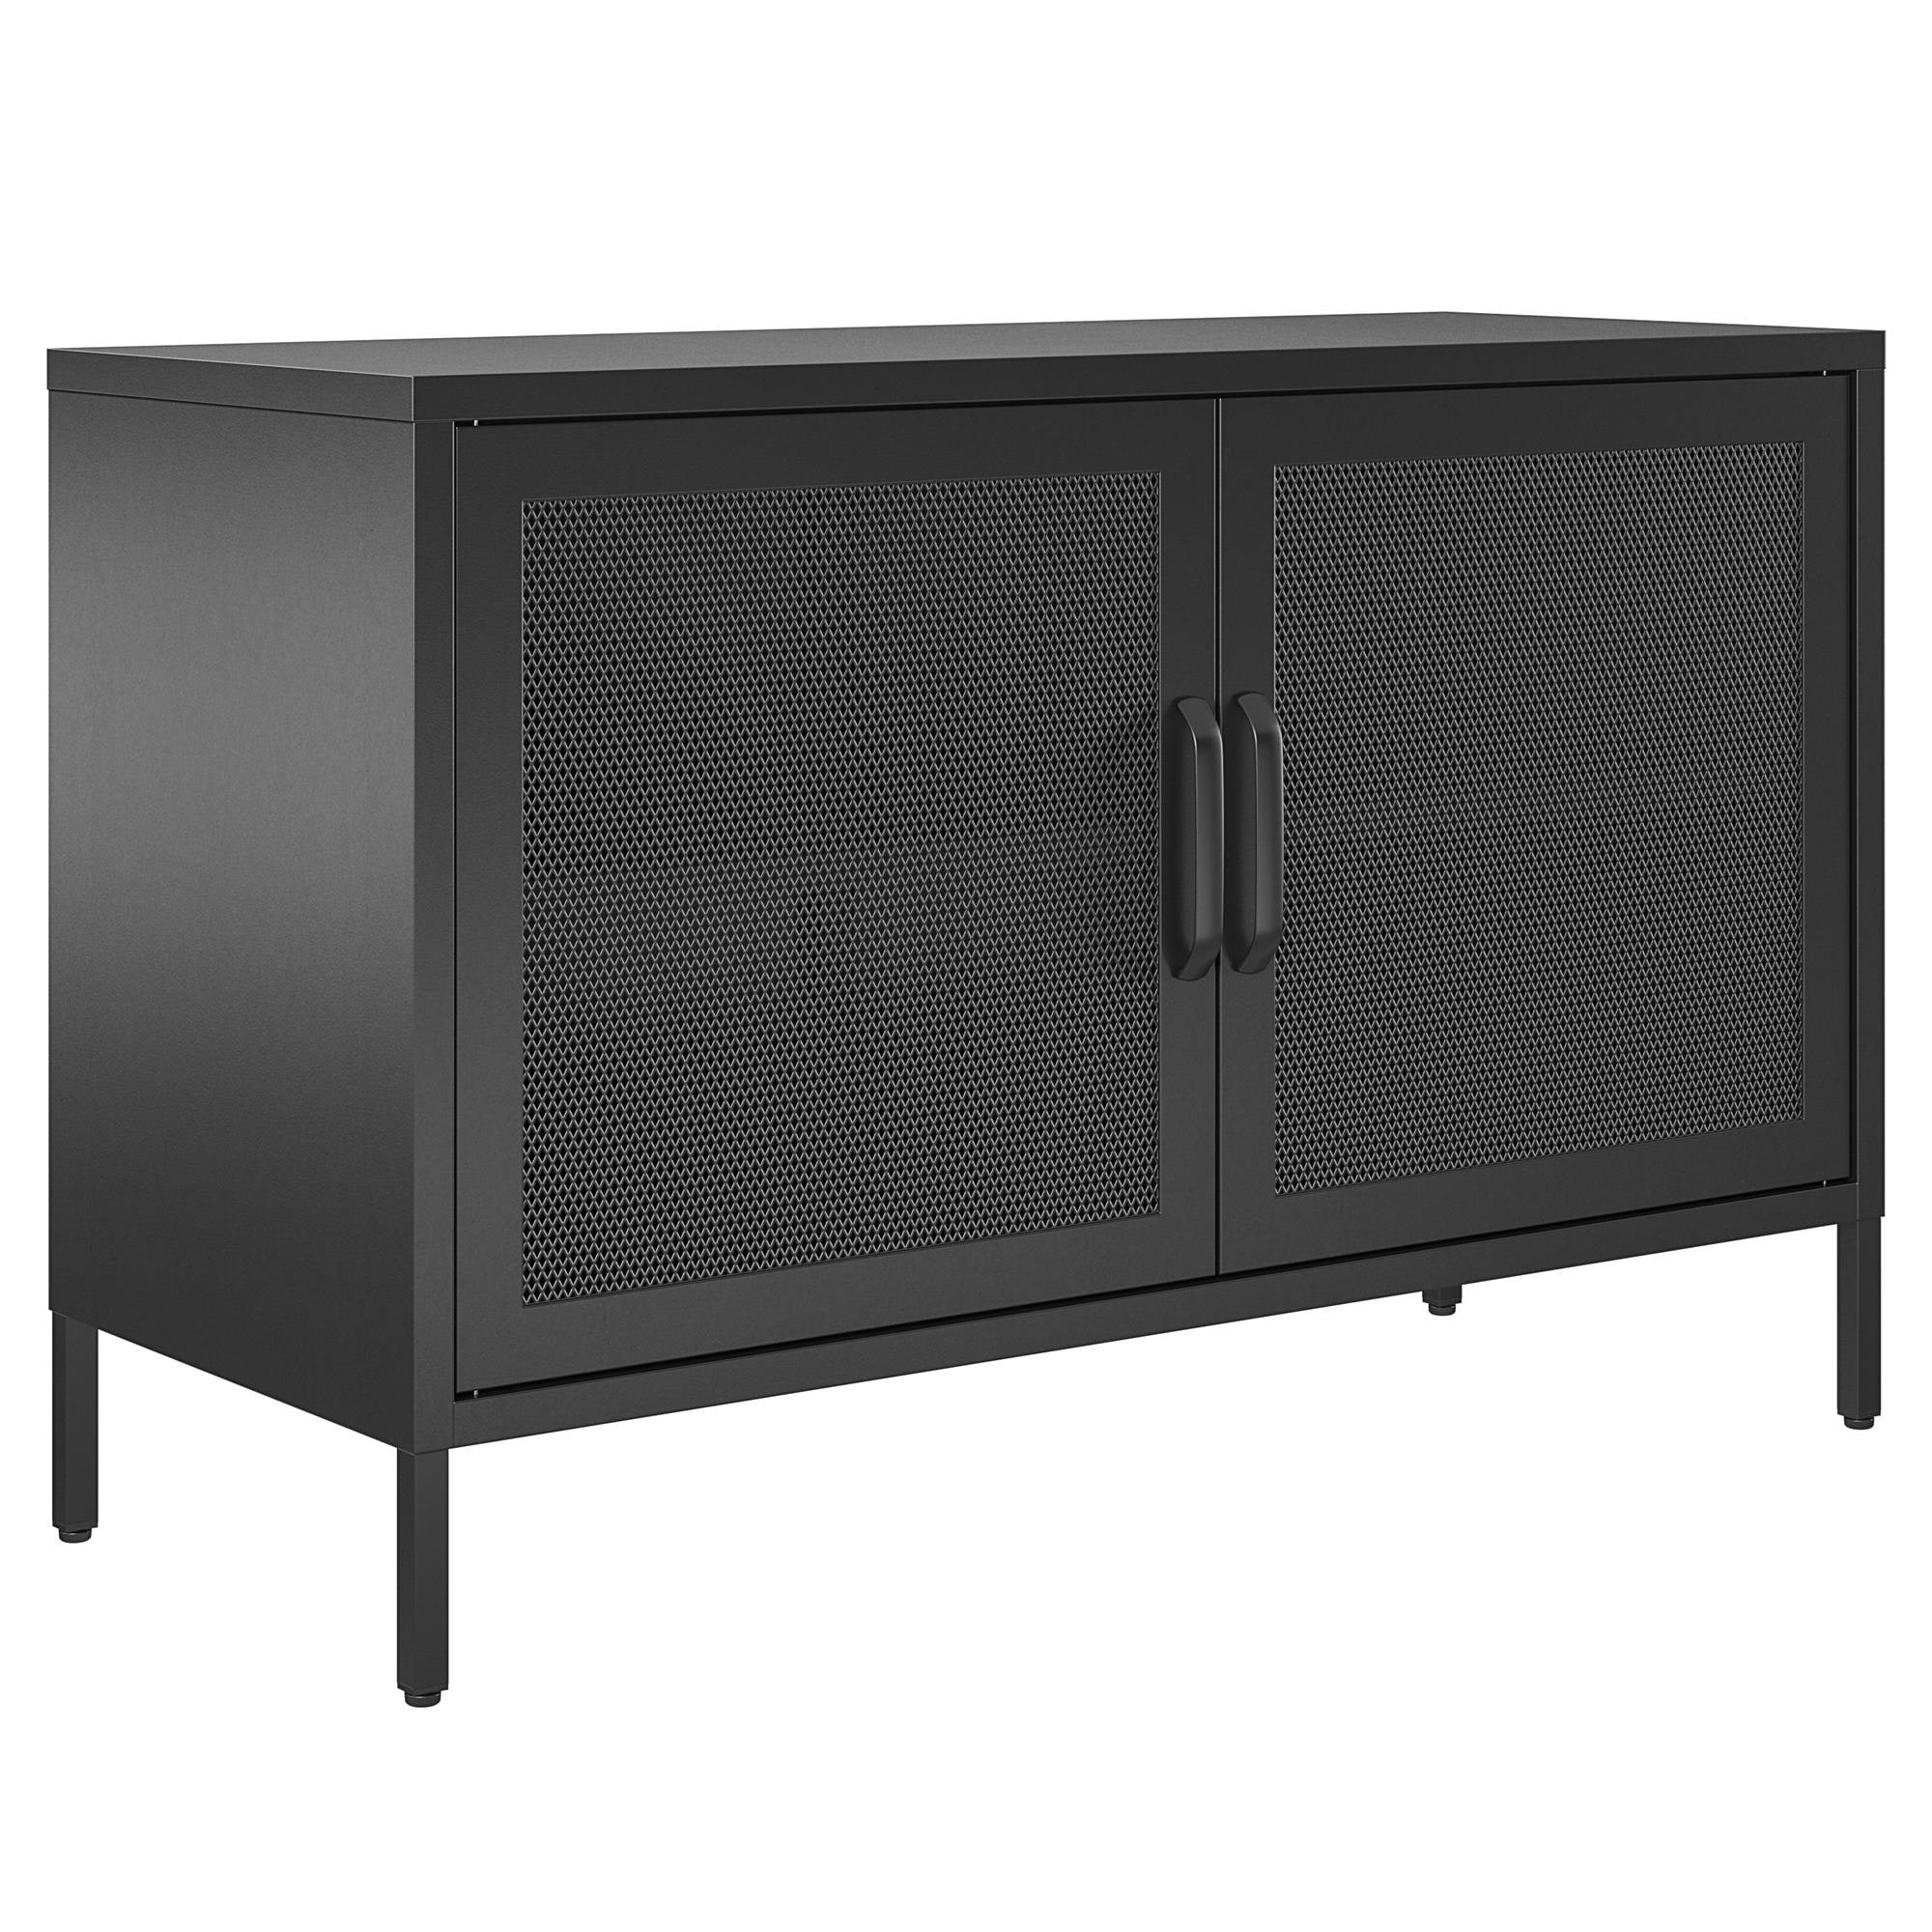 62.9 in. Black Wood Storage Cabinet Kitchen Cabinet with 2-Doors, 3-Dr